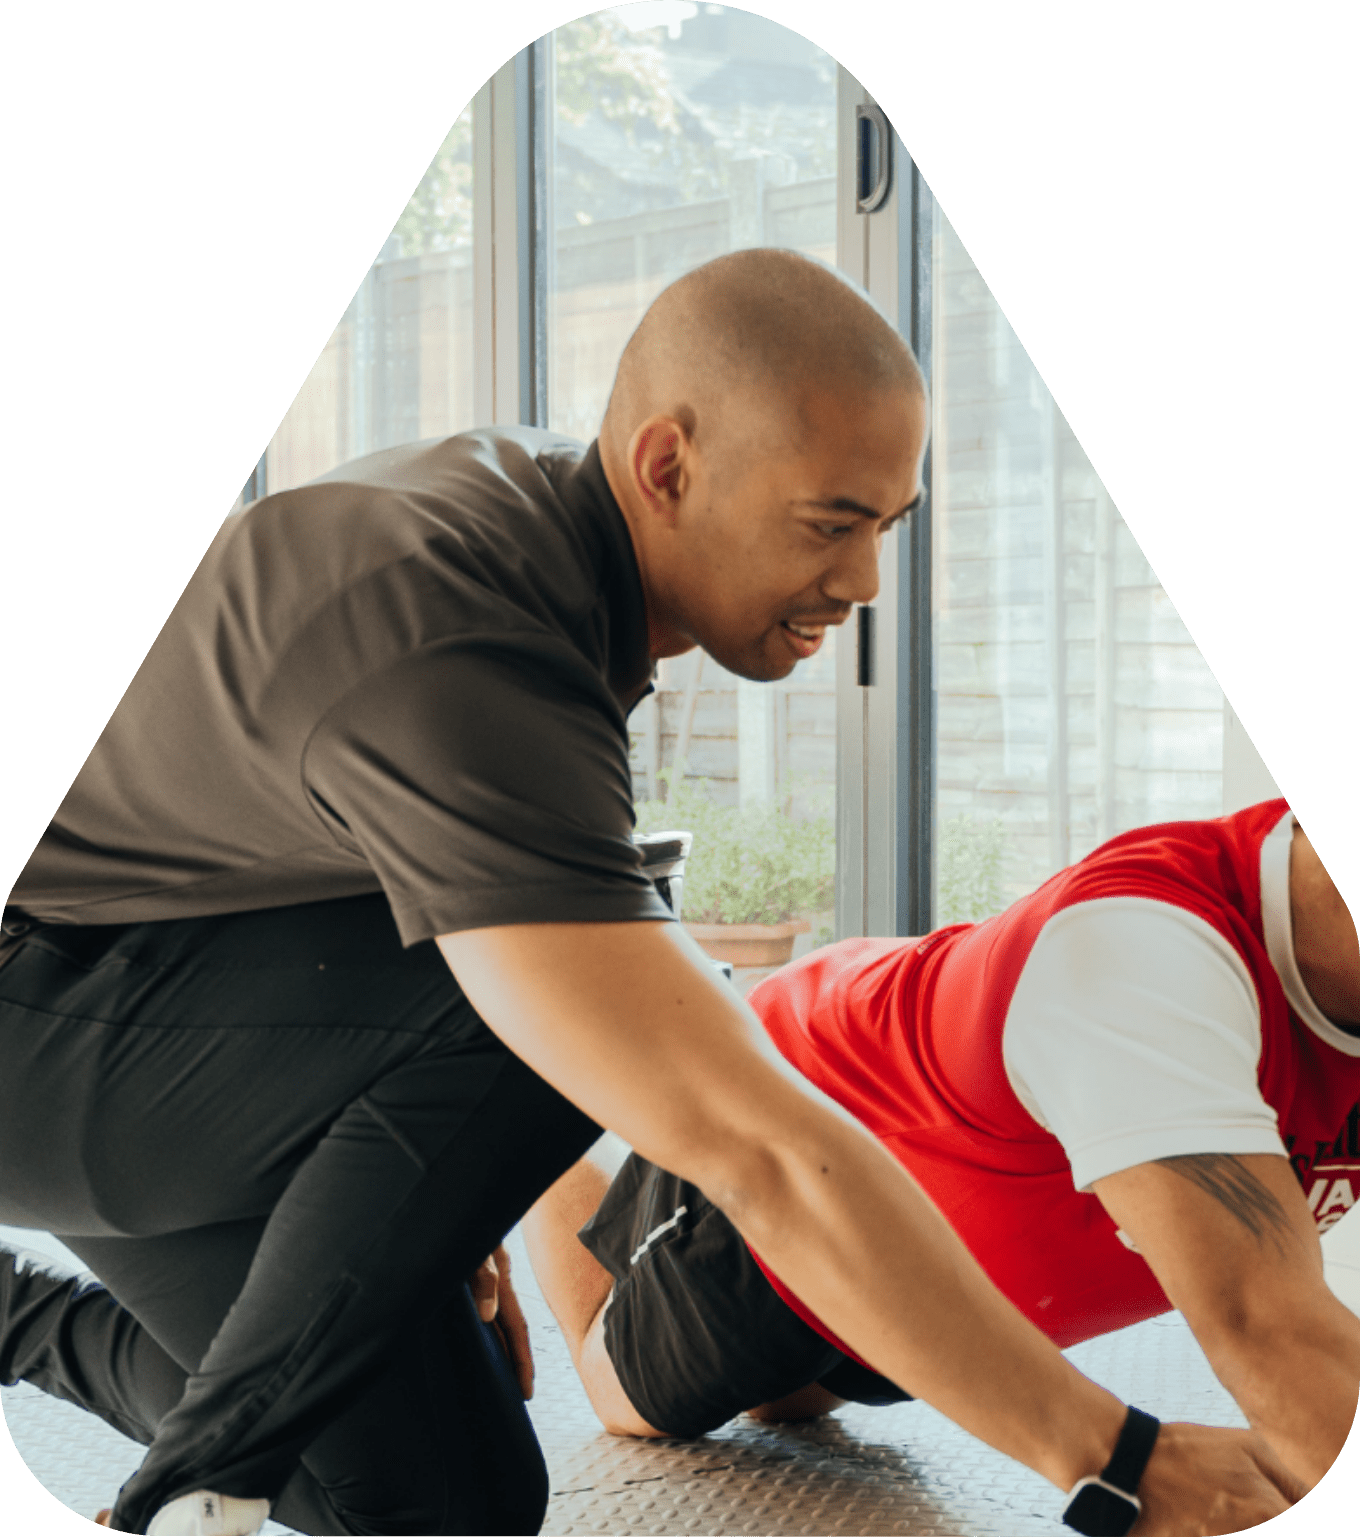 At Home Fitness personal trainer Ilford - Neil Urmatam